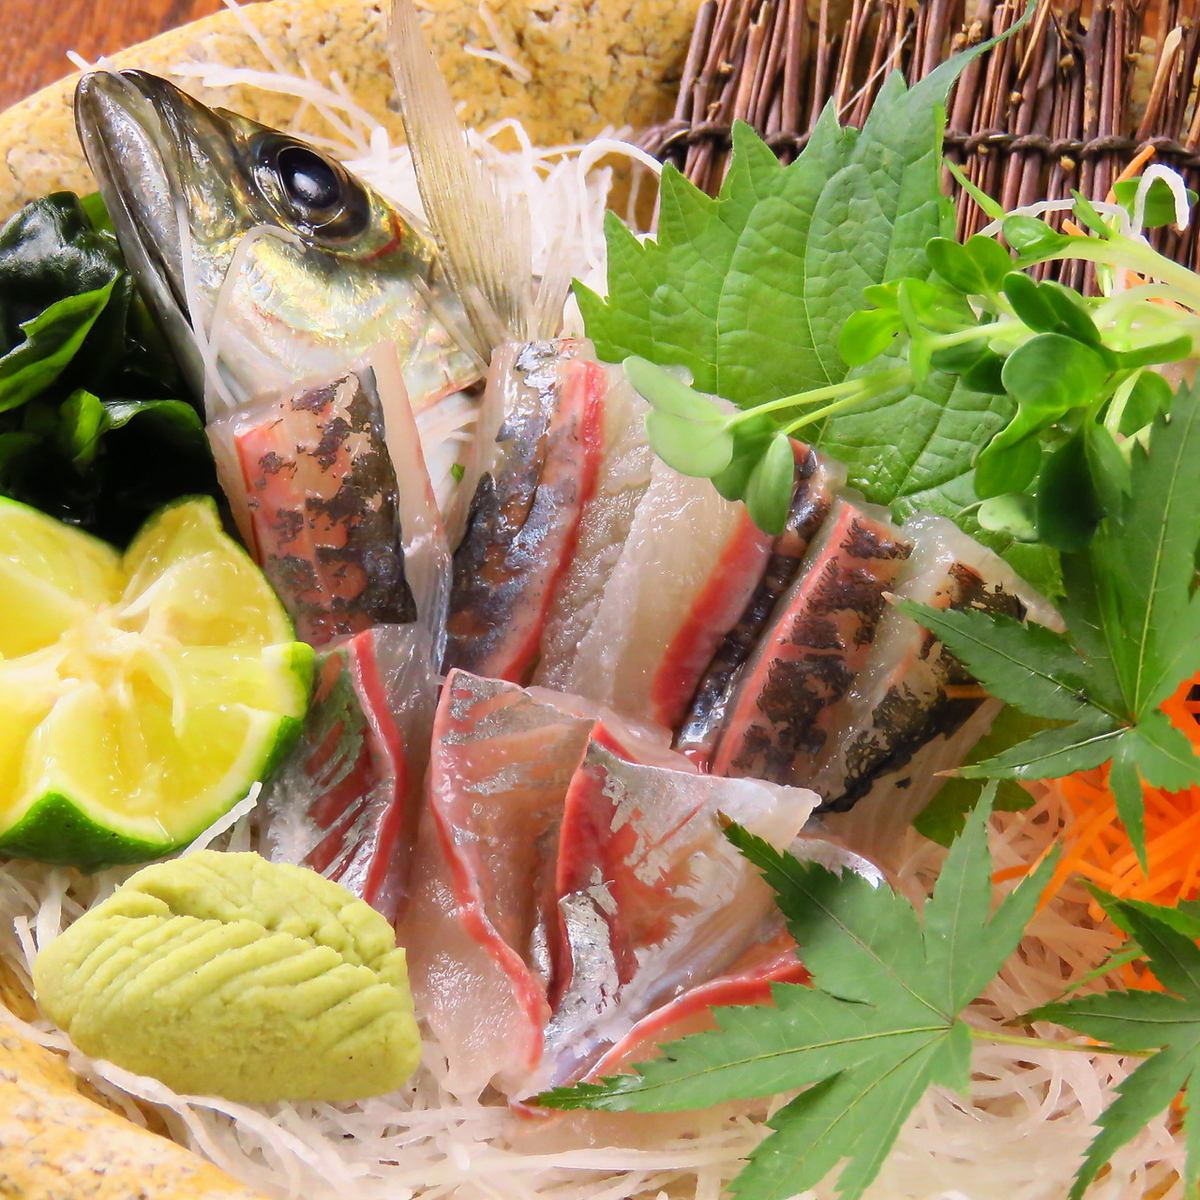 We are particular about purchasing! We will cook fresh seafood that swim in the cage!